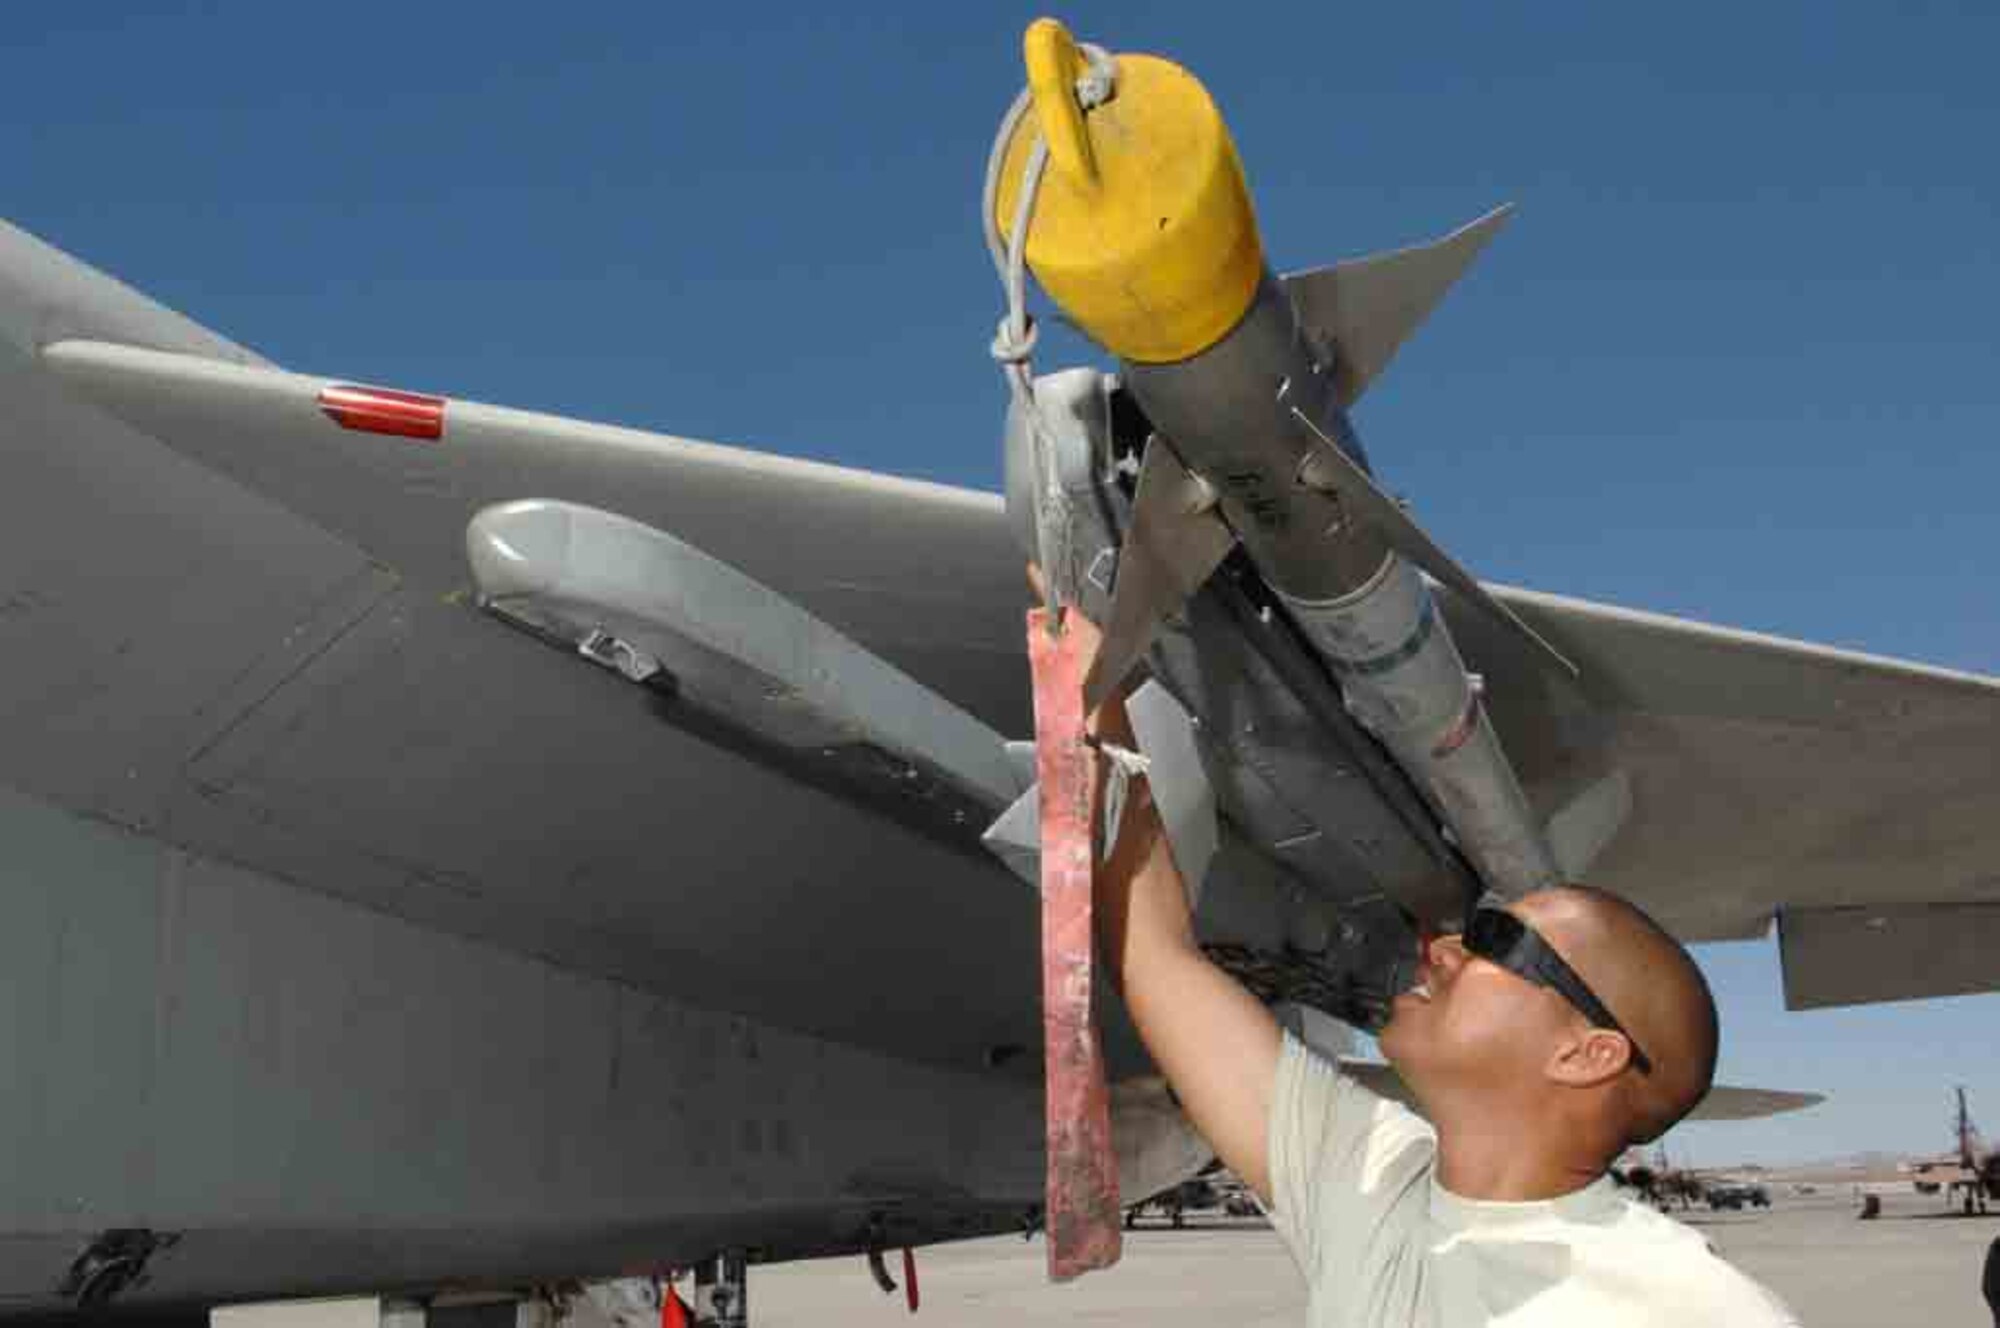 Tech Sgt. John Robles, an F-15 weapons expediter assigned to the 926th Group Detachment 2, performs a supervisory post-load inspection of an AIM-9 missile July 24, 2008 at Nellis Air Force Base, Nev. The 926th Group is an Air Force Reserve unit under 10th Air Force, Naval Air Station Joint Reserve Base, Fort Worth, Texas. The group is located at Nellis AFB as an associate unit to the United States Air Force Warfare Center. Through Total Force Integration, reservists are integrated into regular Air Force units, accomplishing the USAFWC's mission alongside REGAF personnel on a daily basis.
(U.S. Air Force Photo/Senior Airman Larry E. Reid Jr., Released)